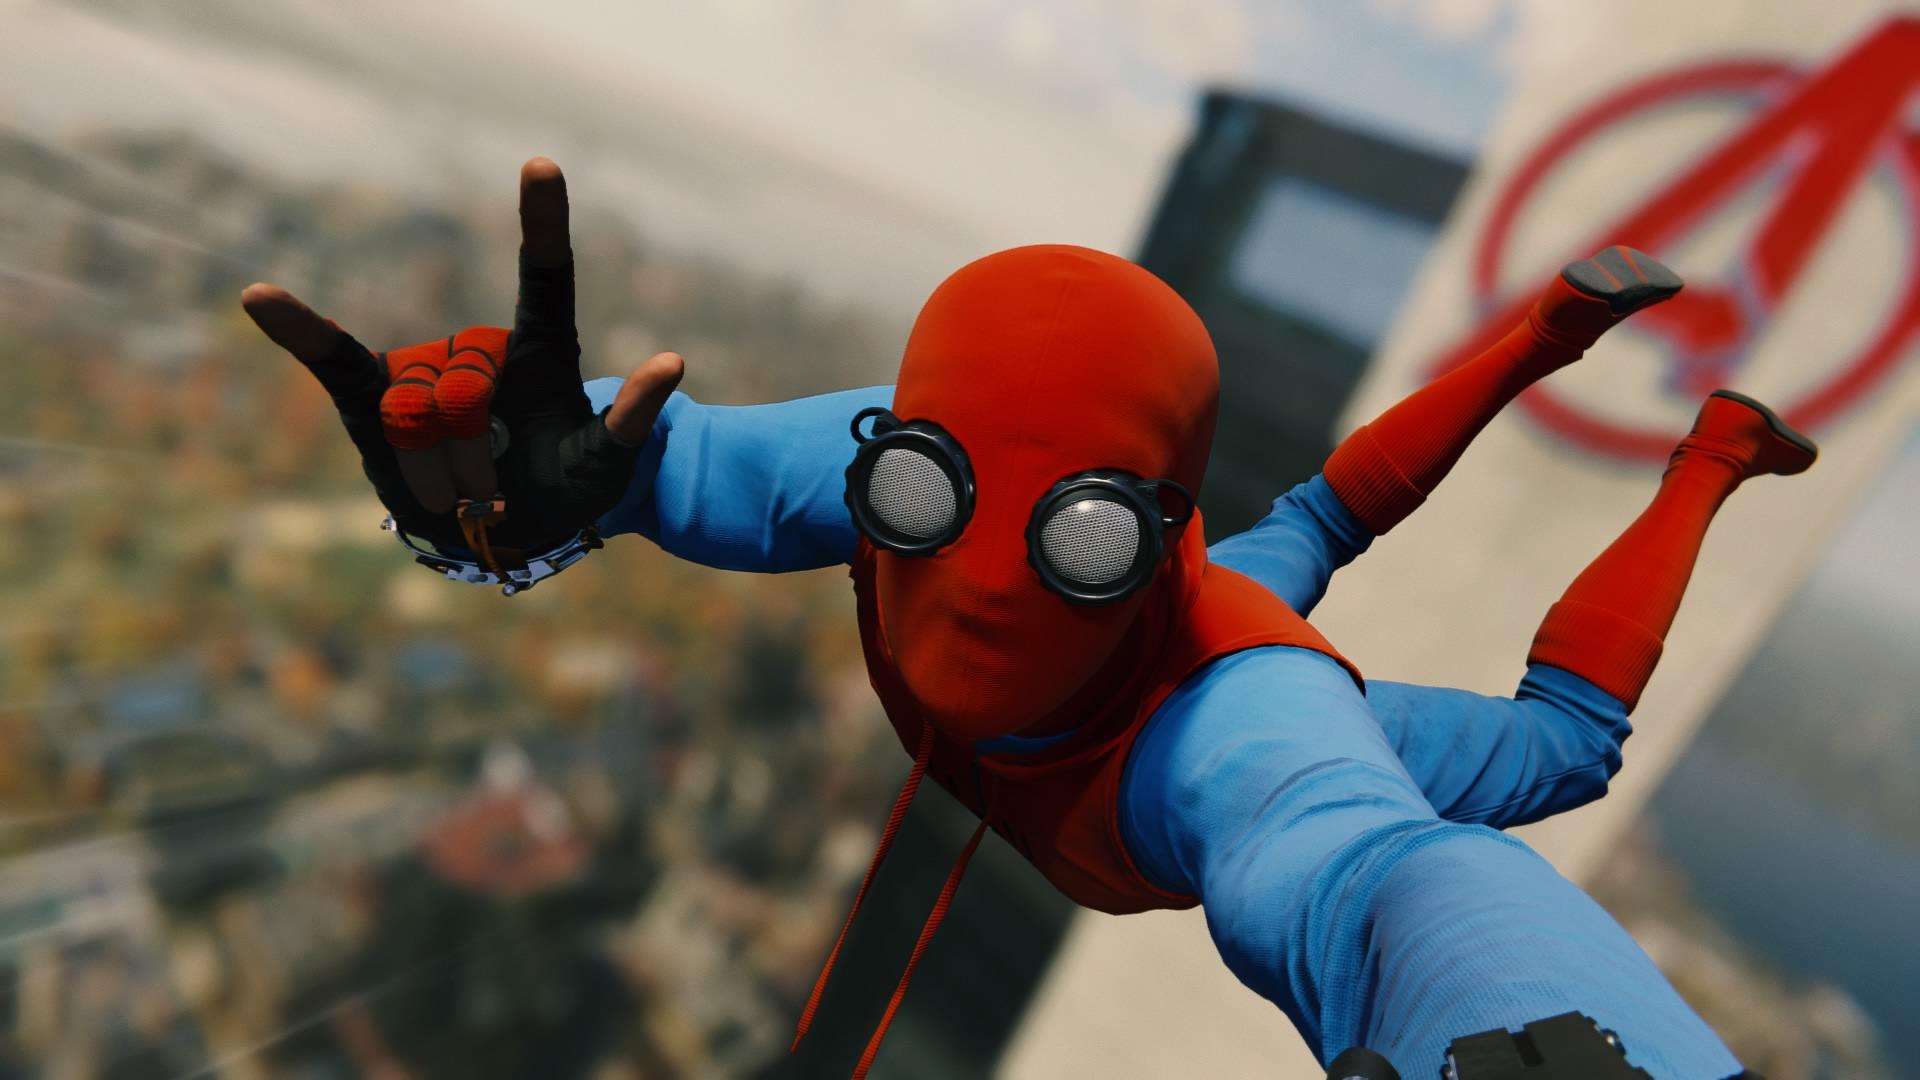 I really love the homemade suit